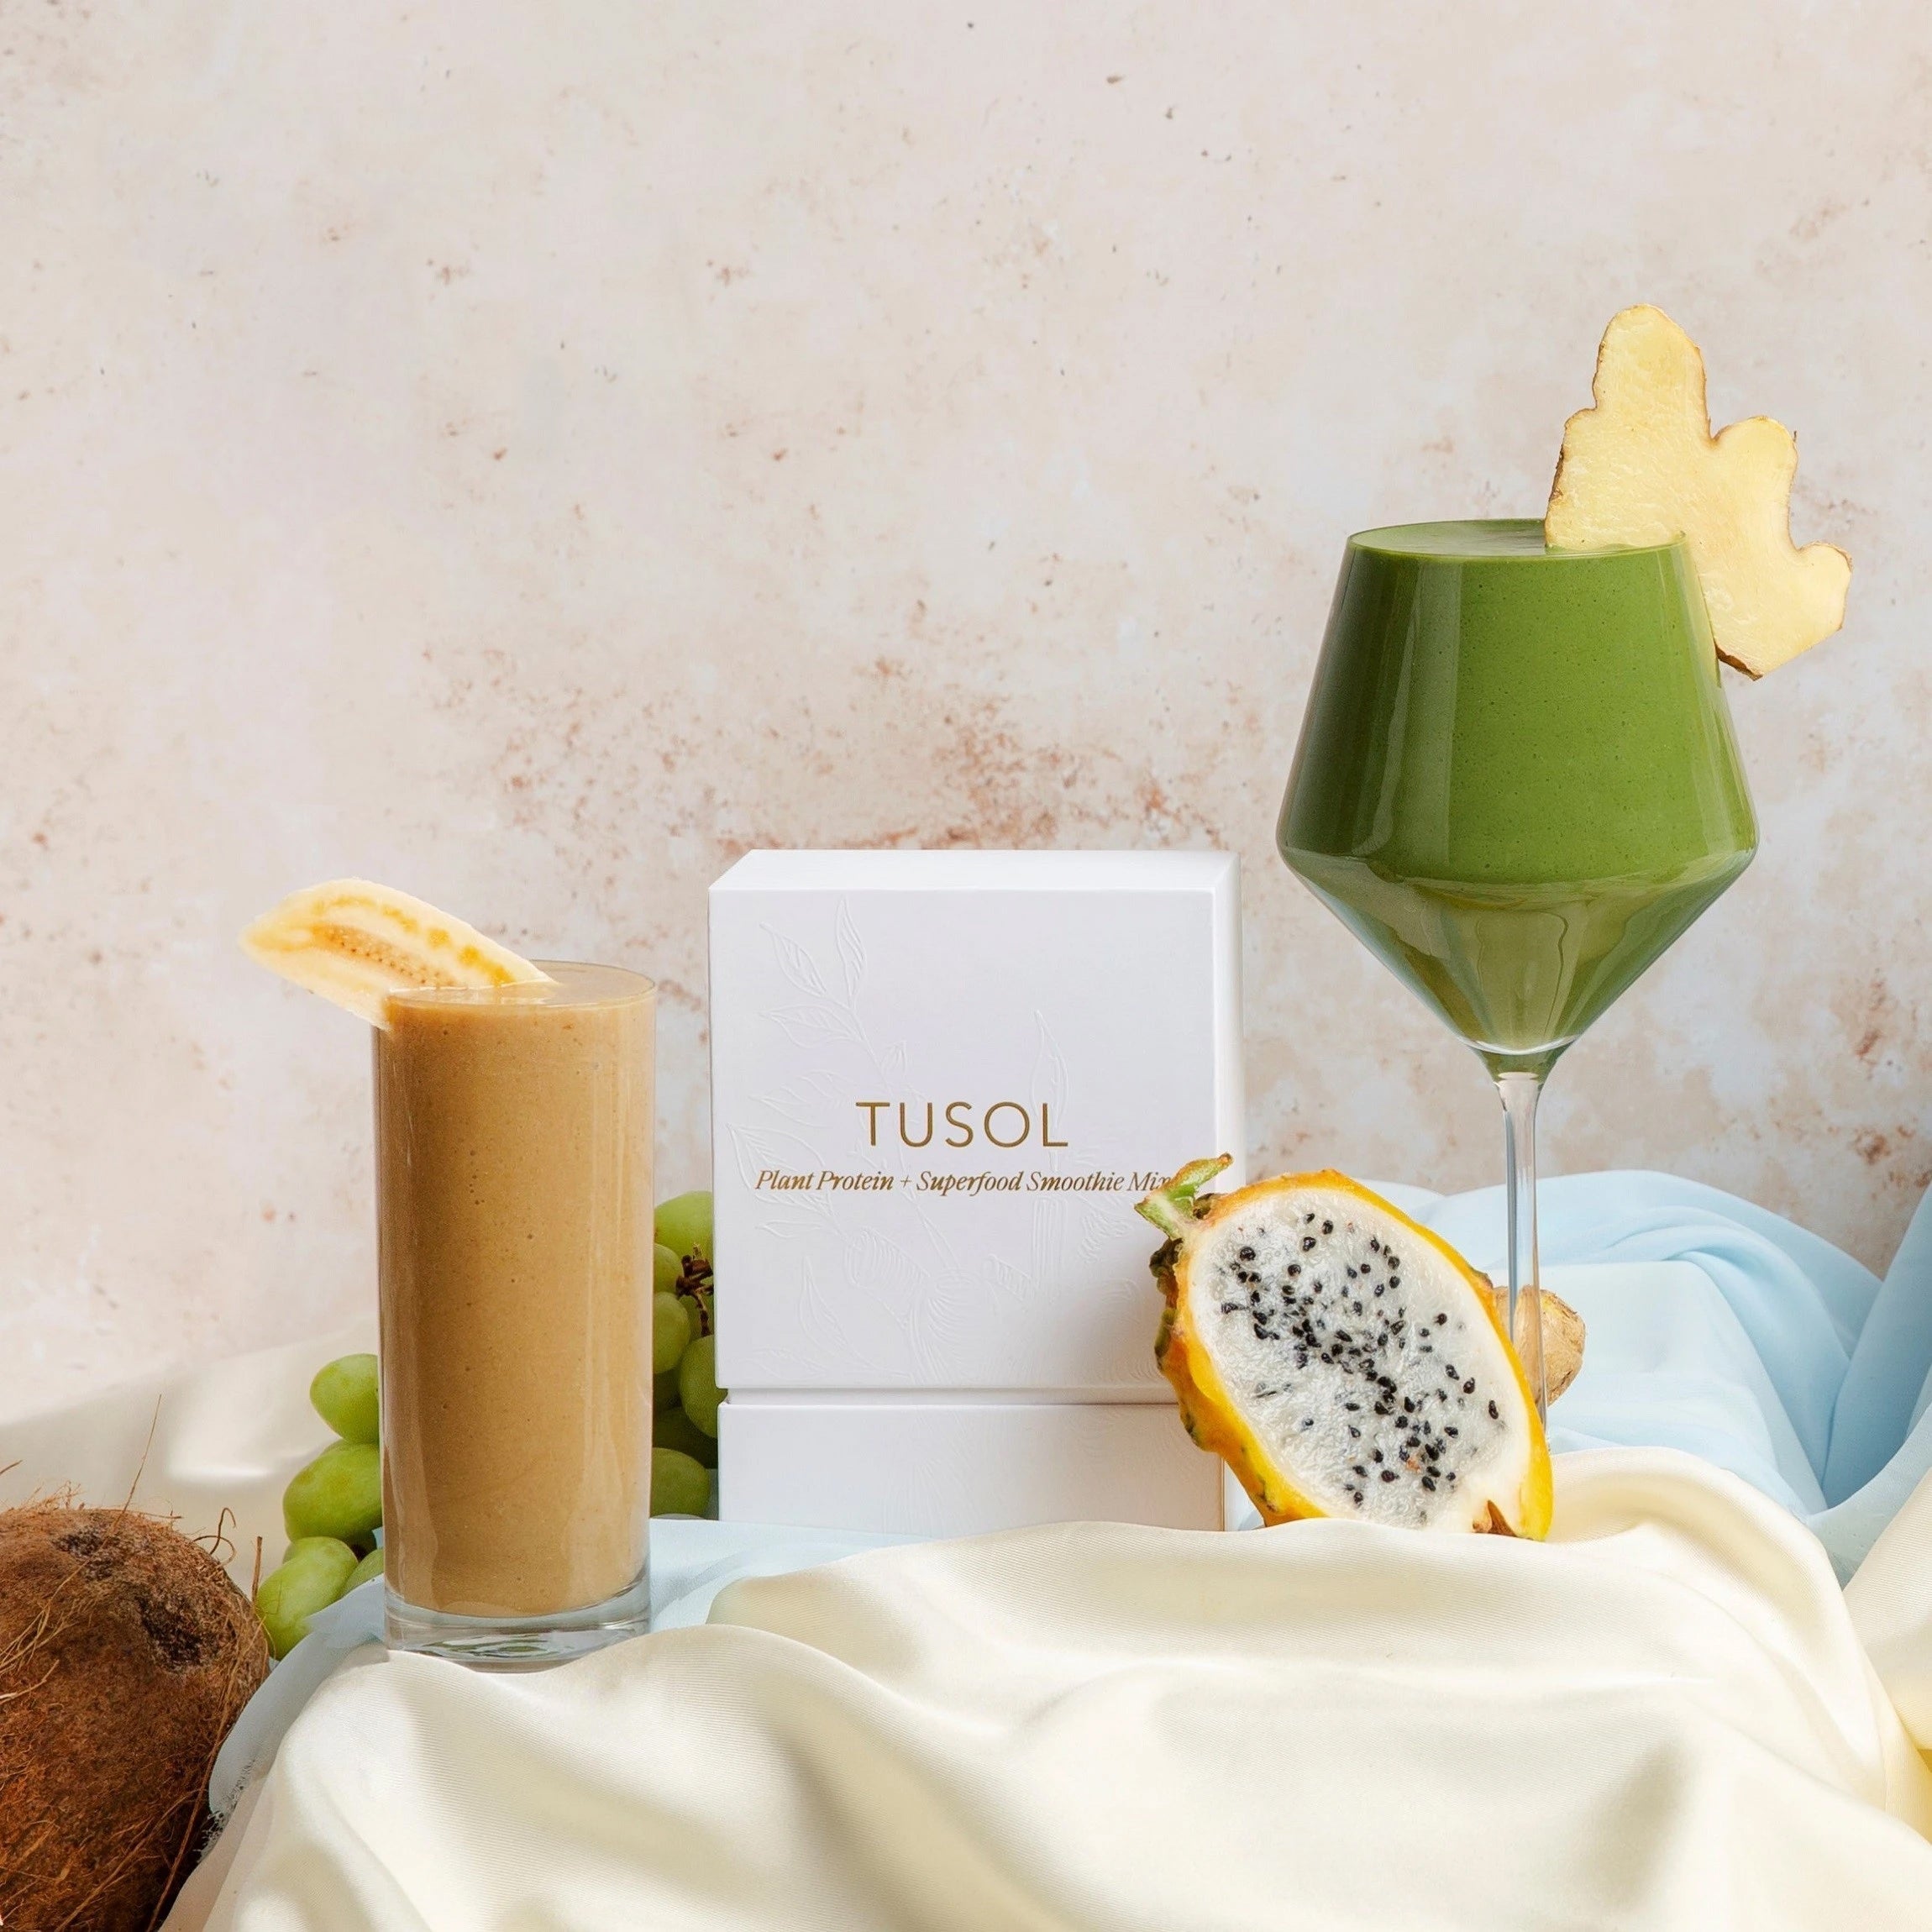 TUSOL Organic Plant Protein + Superfood Smoothie Mix | Sample Box - Multiverse